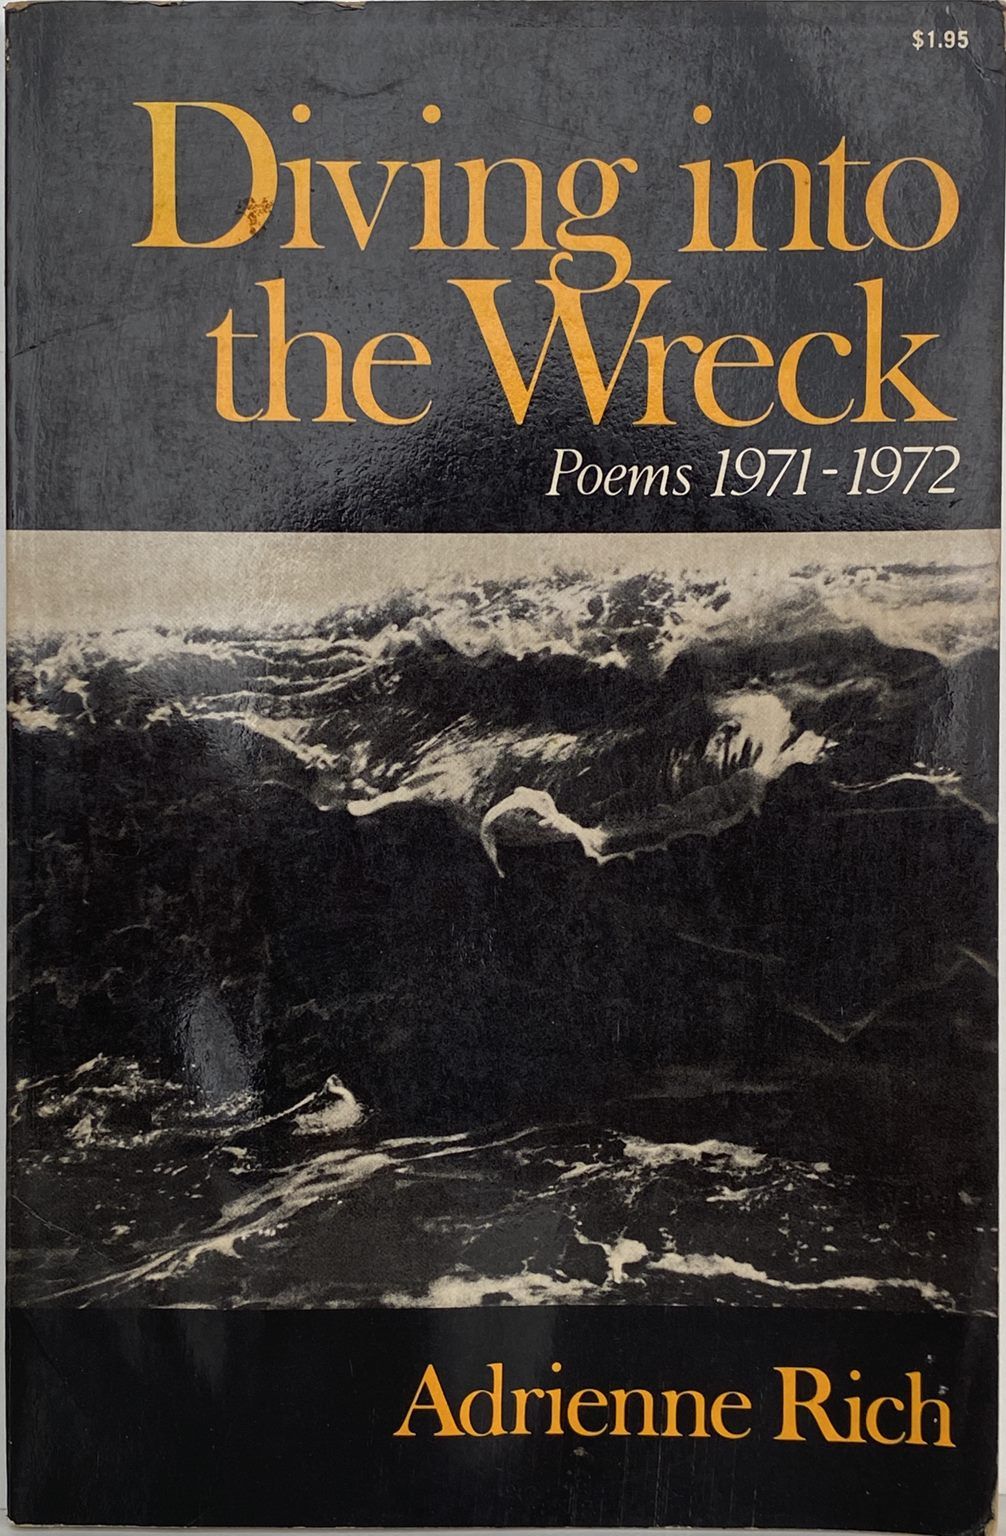 DIVING INTO THE WRECK: Poems 1971-1972